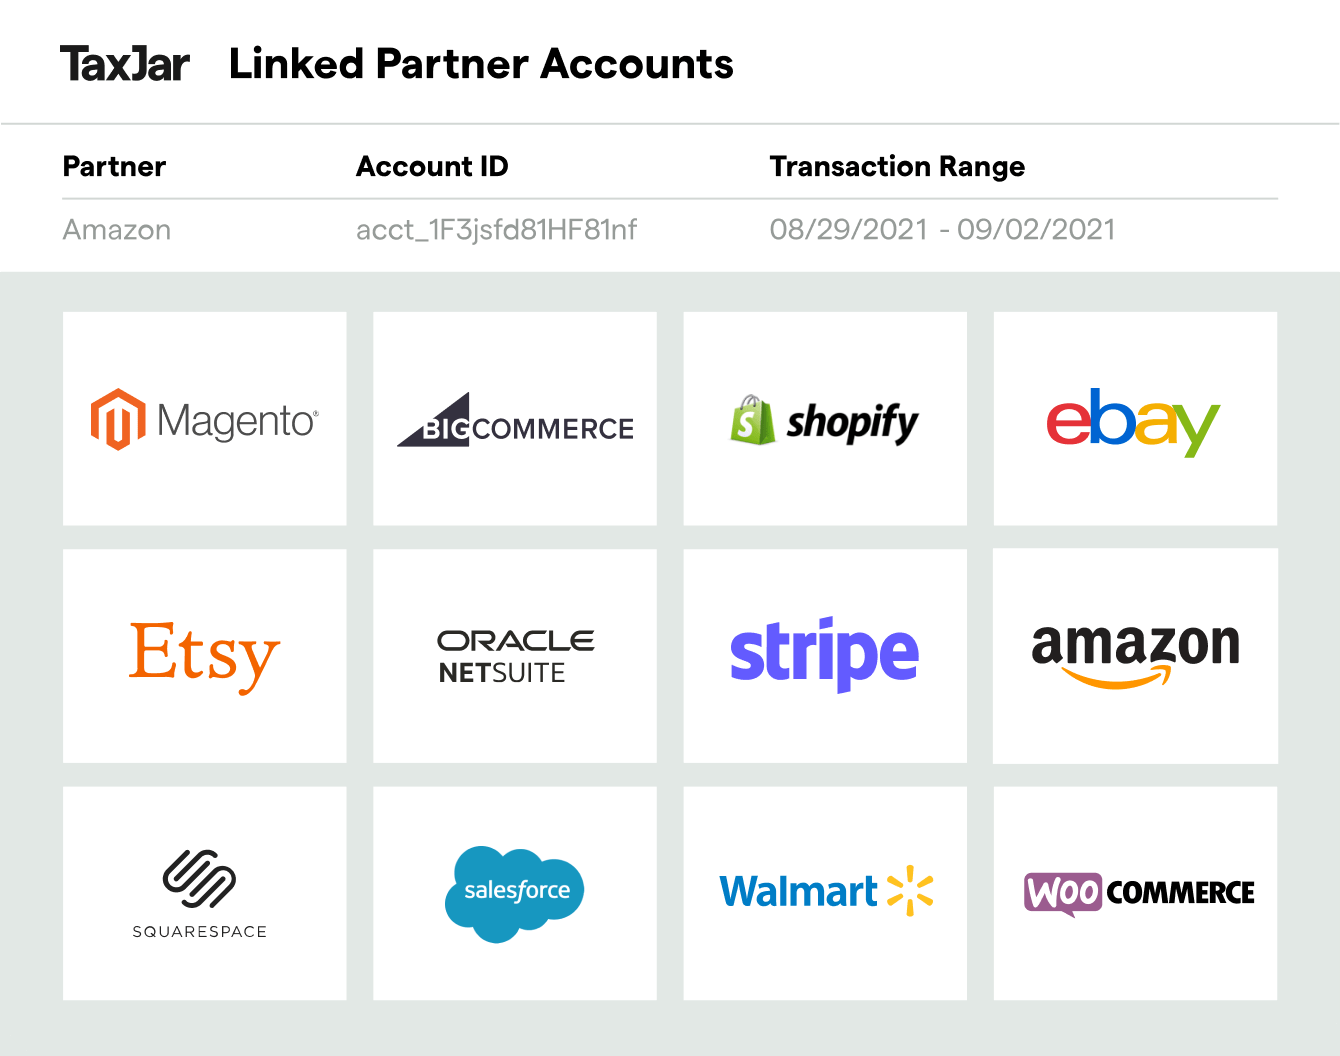 TaxJar's supported integrations include Magento, BigCommerce, Shopify, Ebay, and more